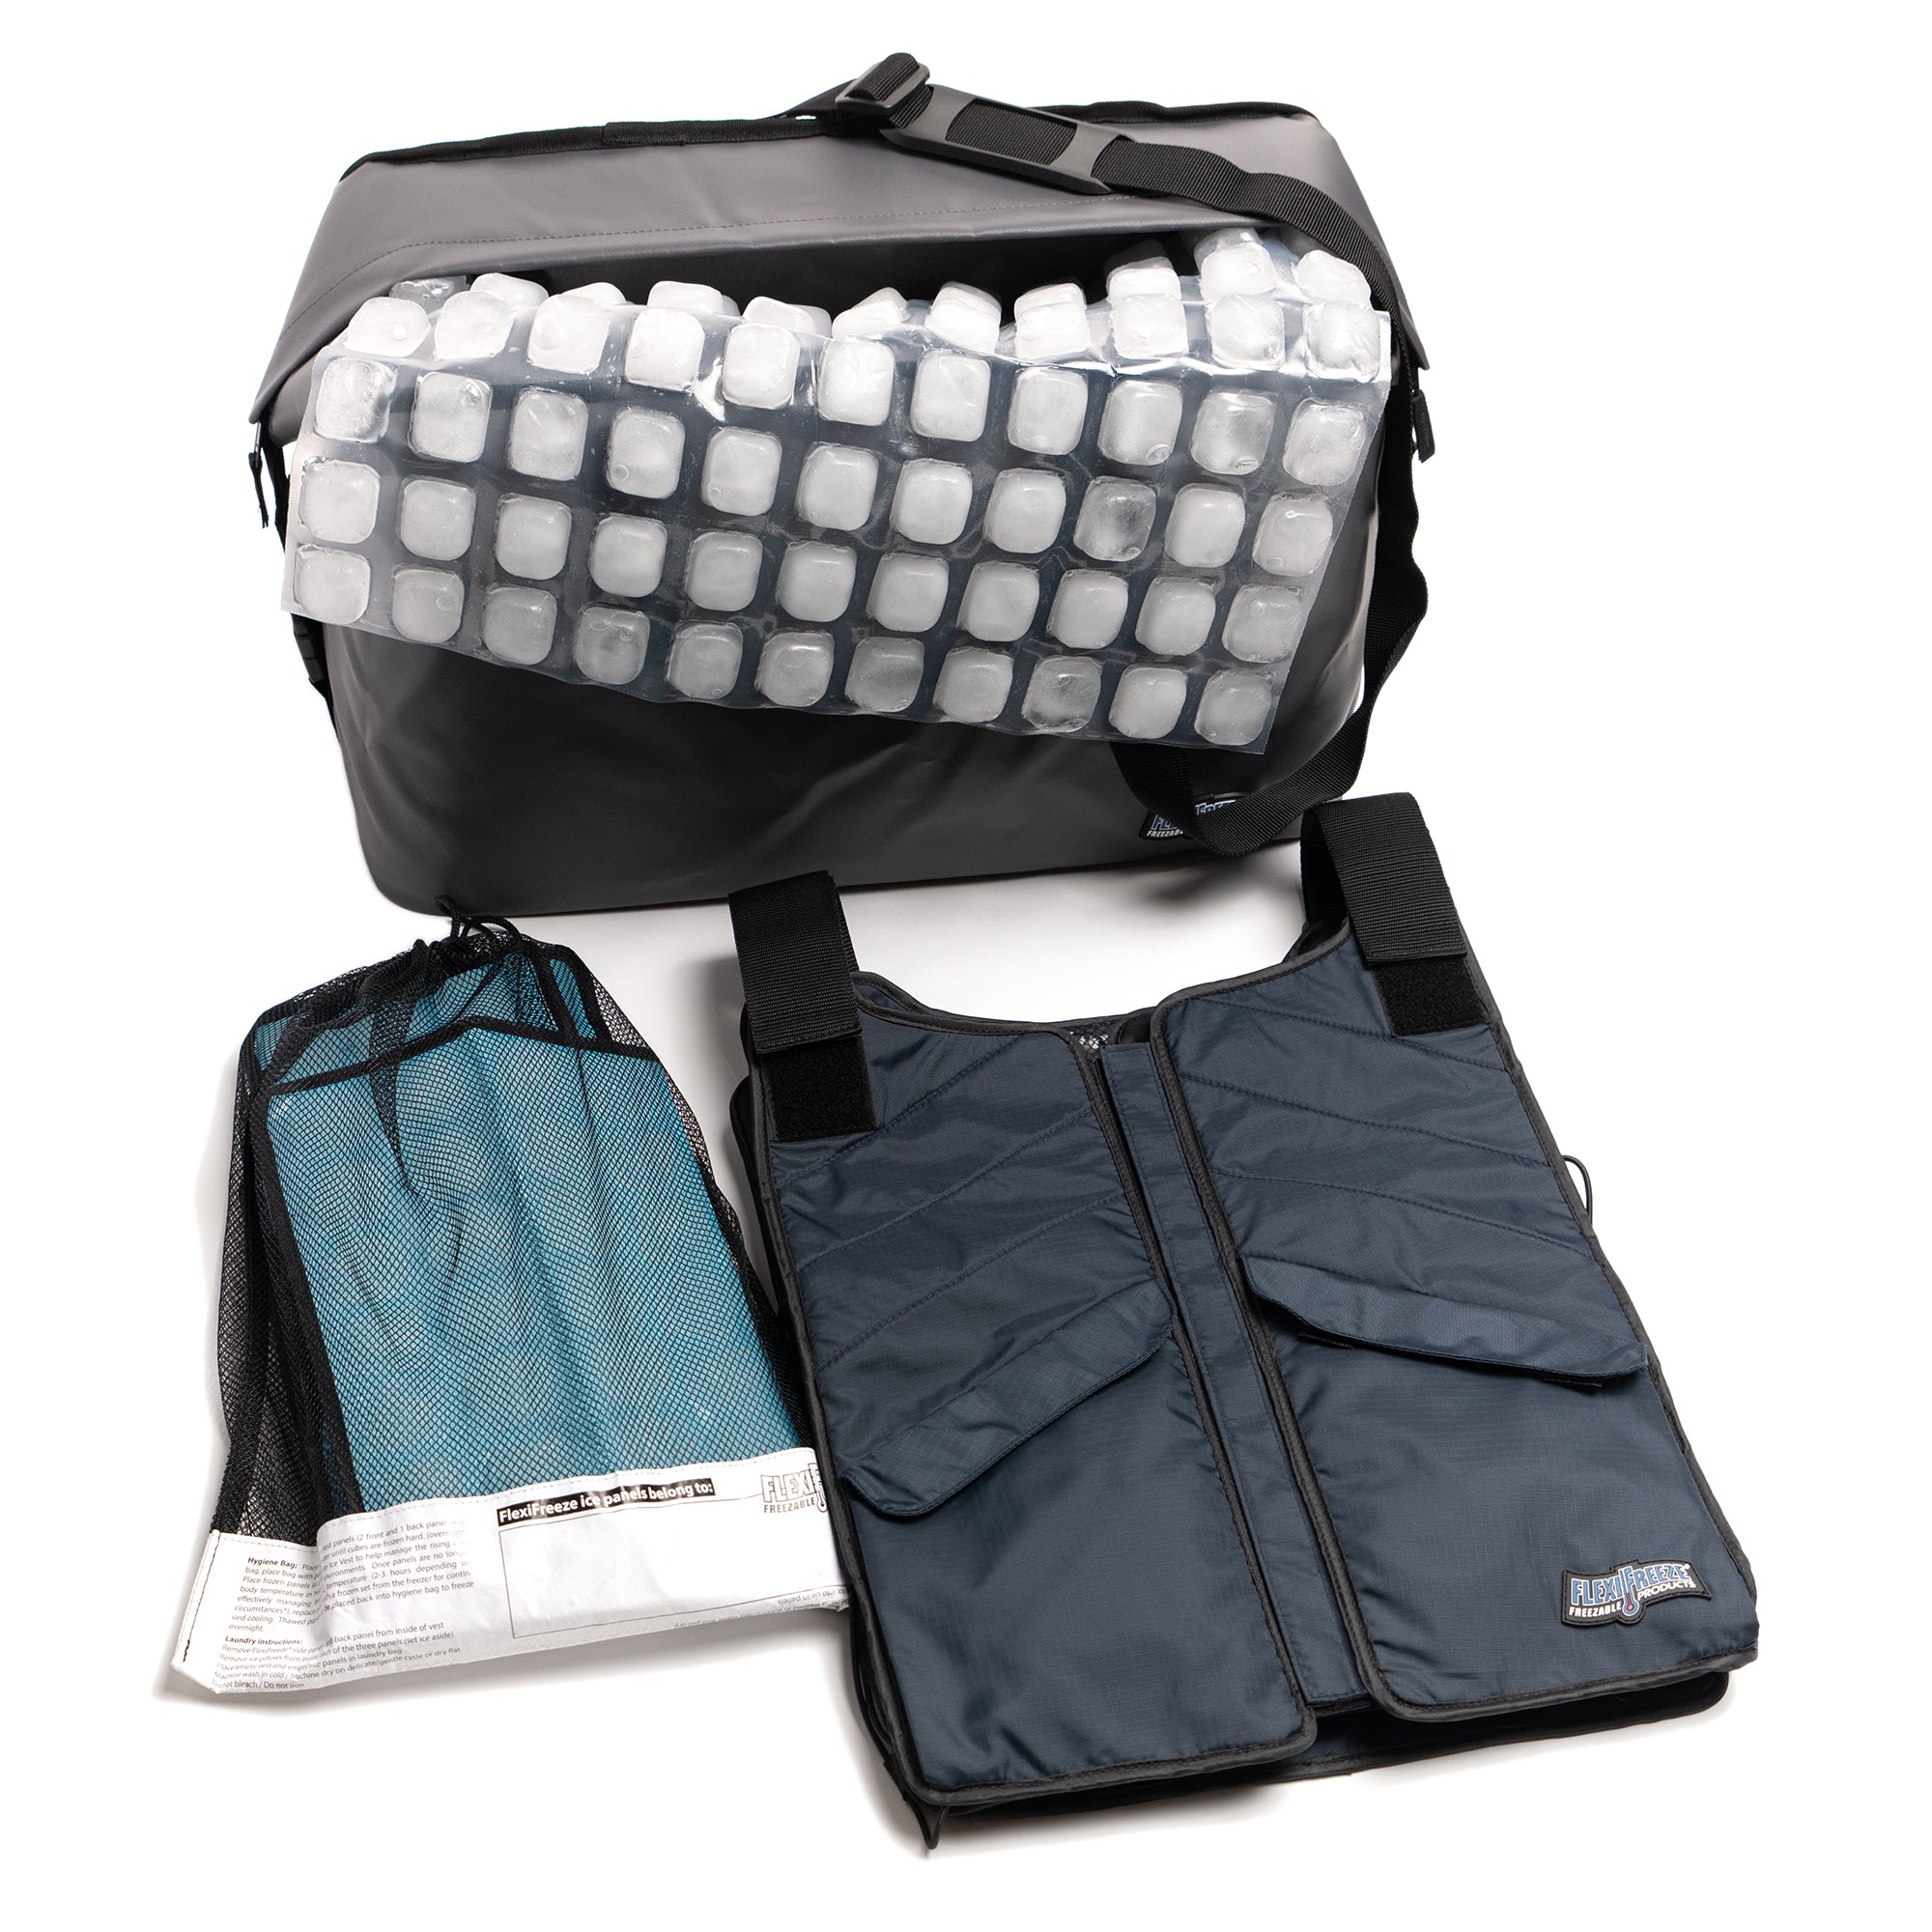 Professional Series Cooling Kit - Blue Velcro, includes replacement panels, blue ice vest, gray insulated bag, and FlexiFreeze ice sheet